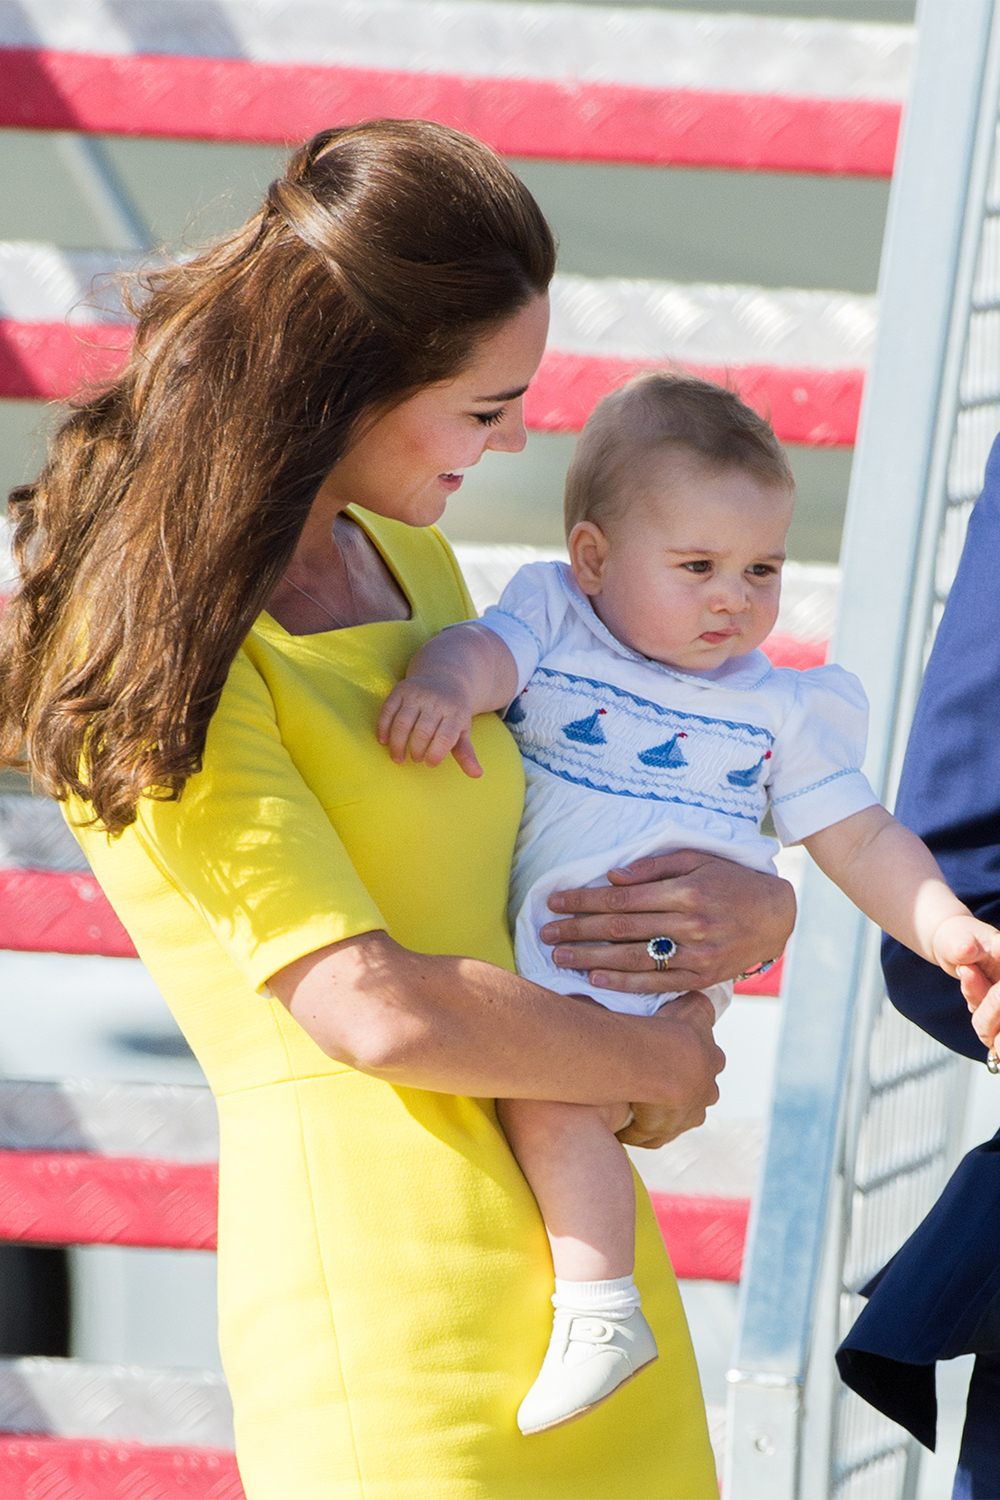 Touching down in Sydney with his mother the Duchess of Cambridge in April, 2014.